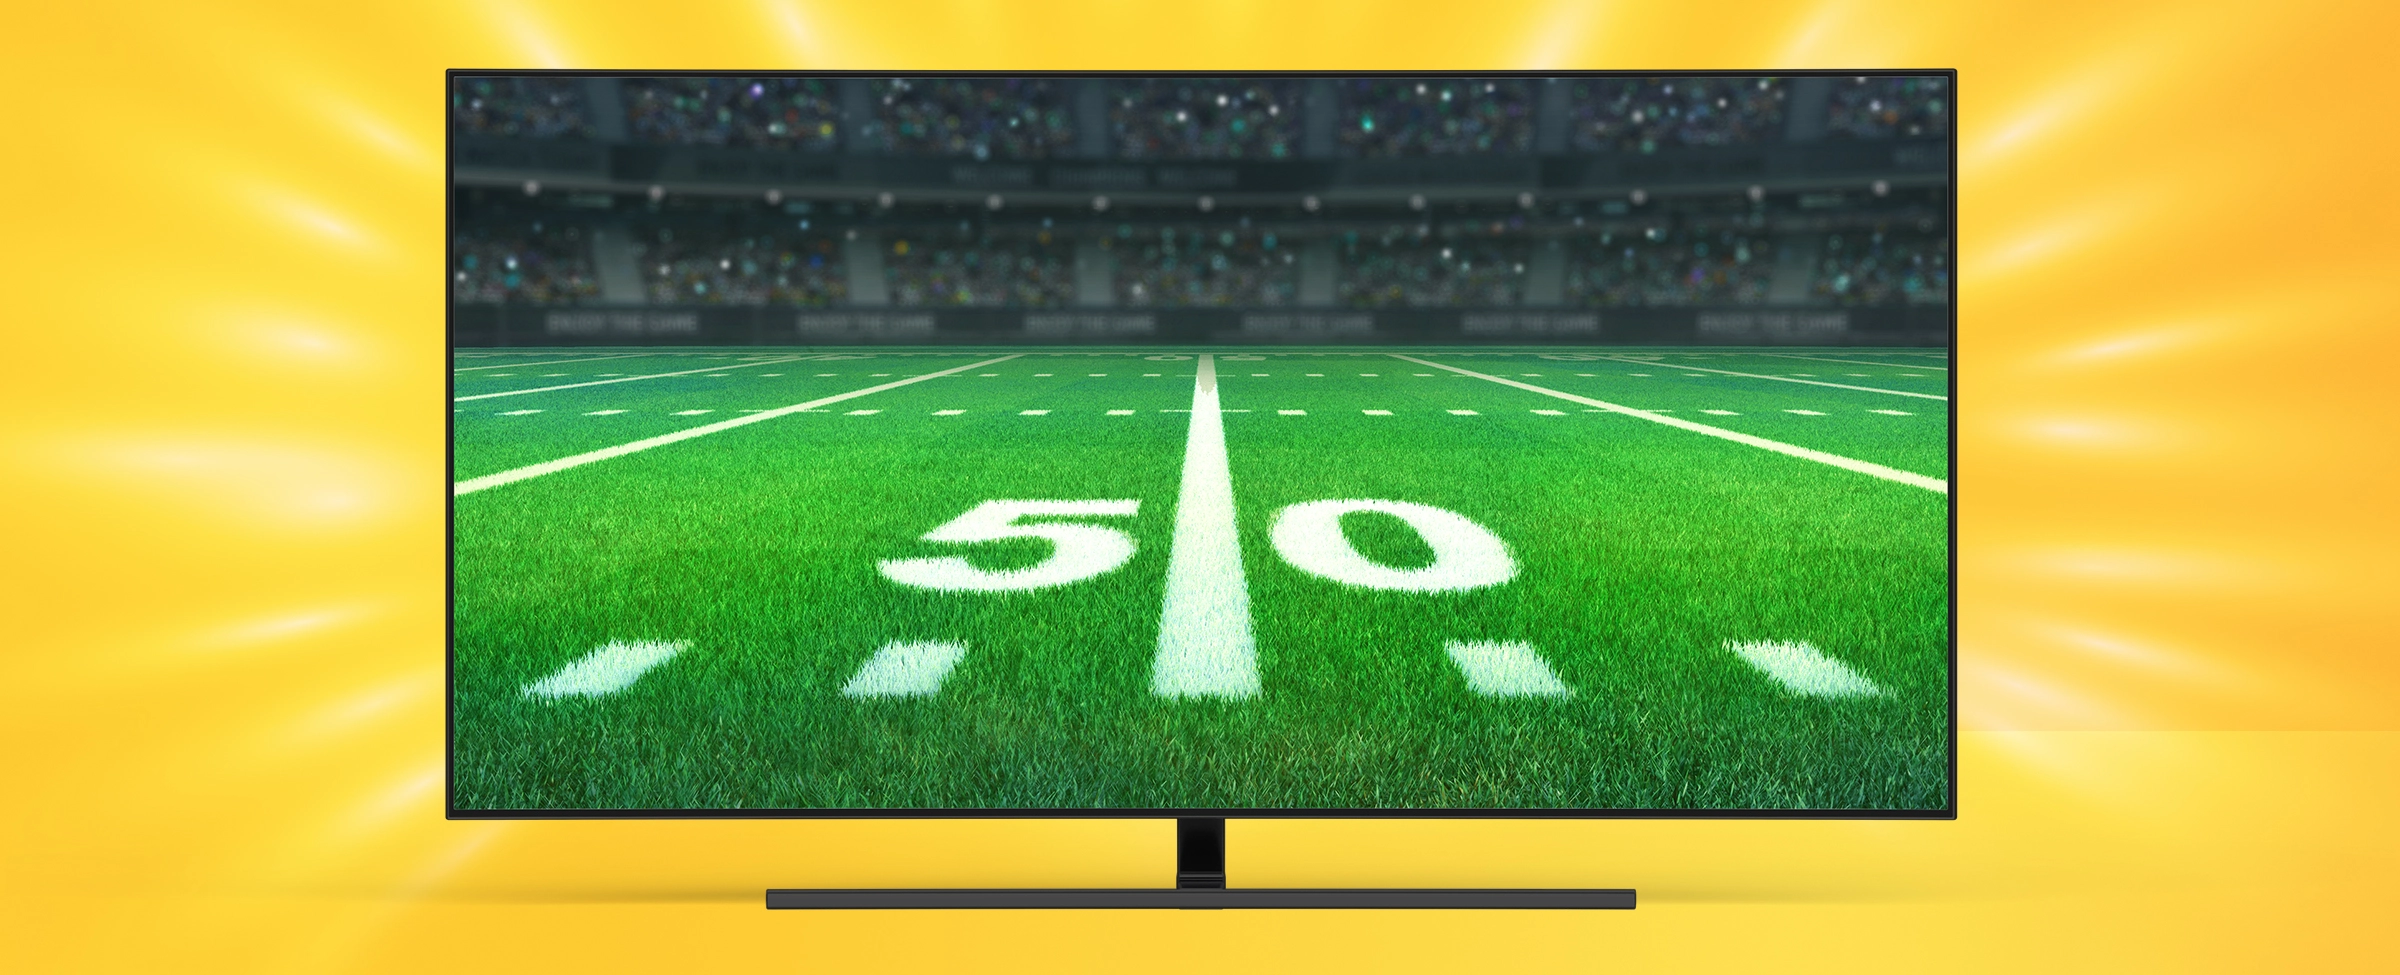 A gridiron pitch shown on a tv screen on a yellow background